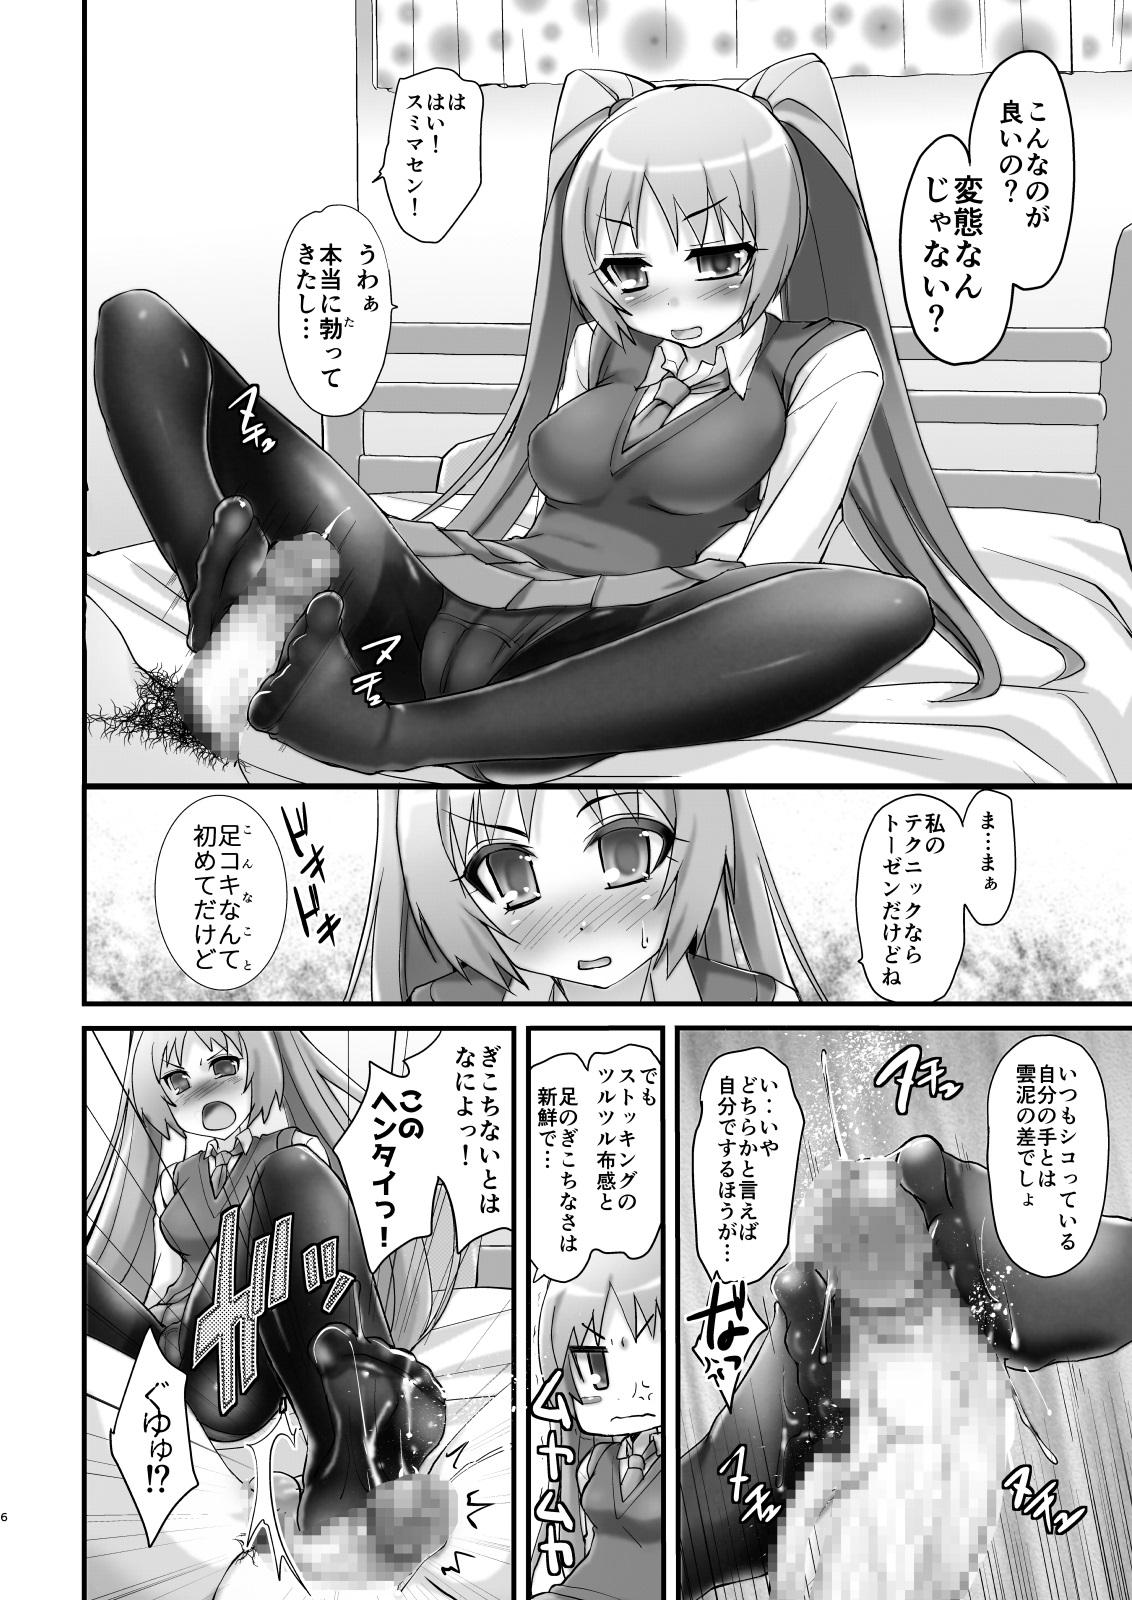 Lesbian Tsundere Tights to Twintails - Original Bigcock - Page 6